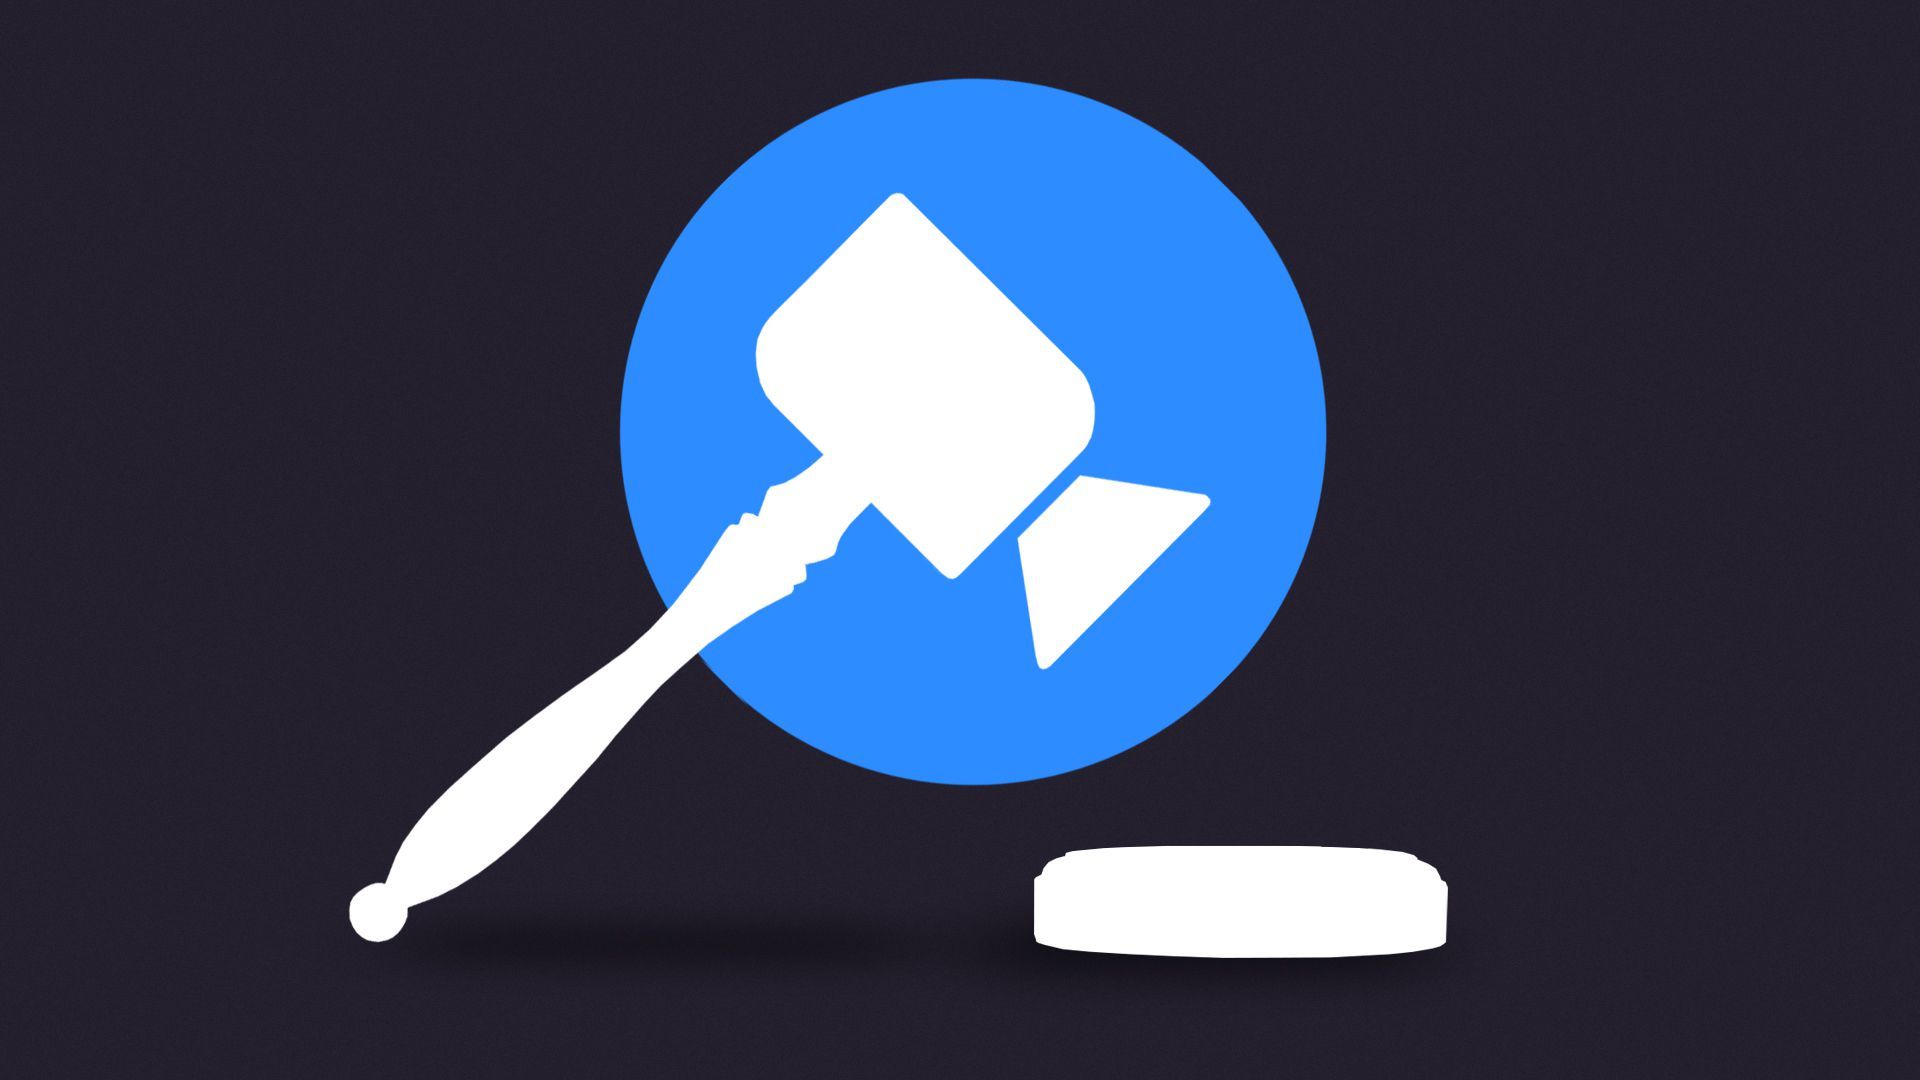 Illustration of the Zoom logo as a gavel